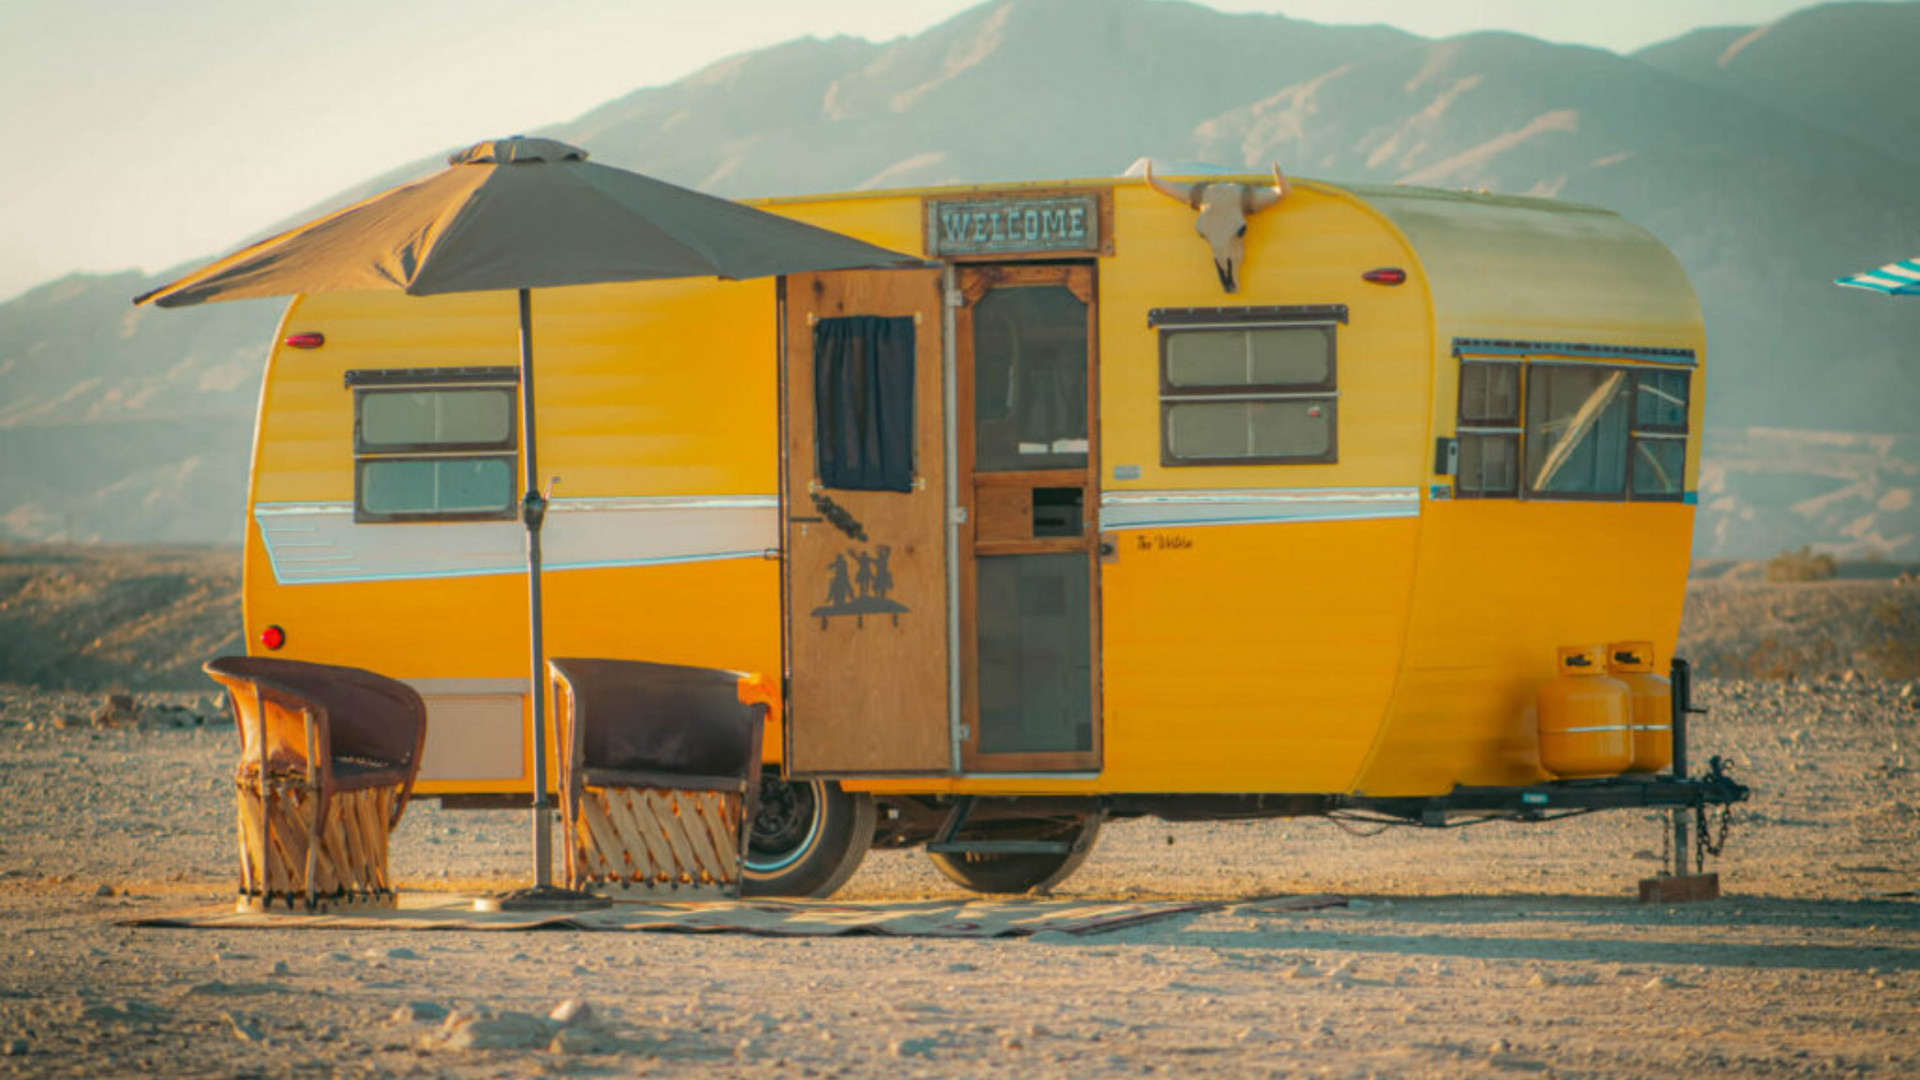 Bungalows of the Desert prides itself on rescuing neglected and abandoned vintage trailers. 